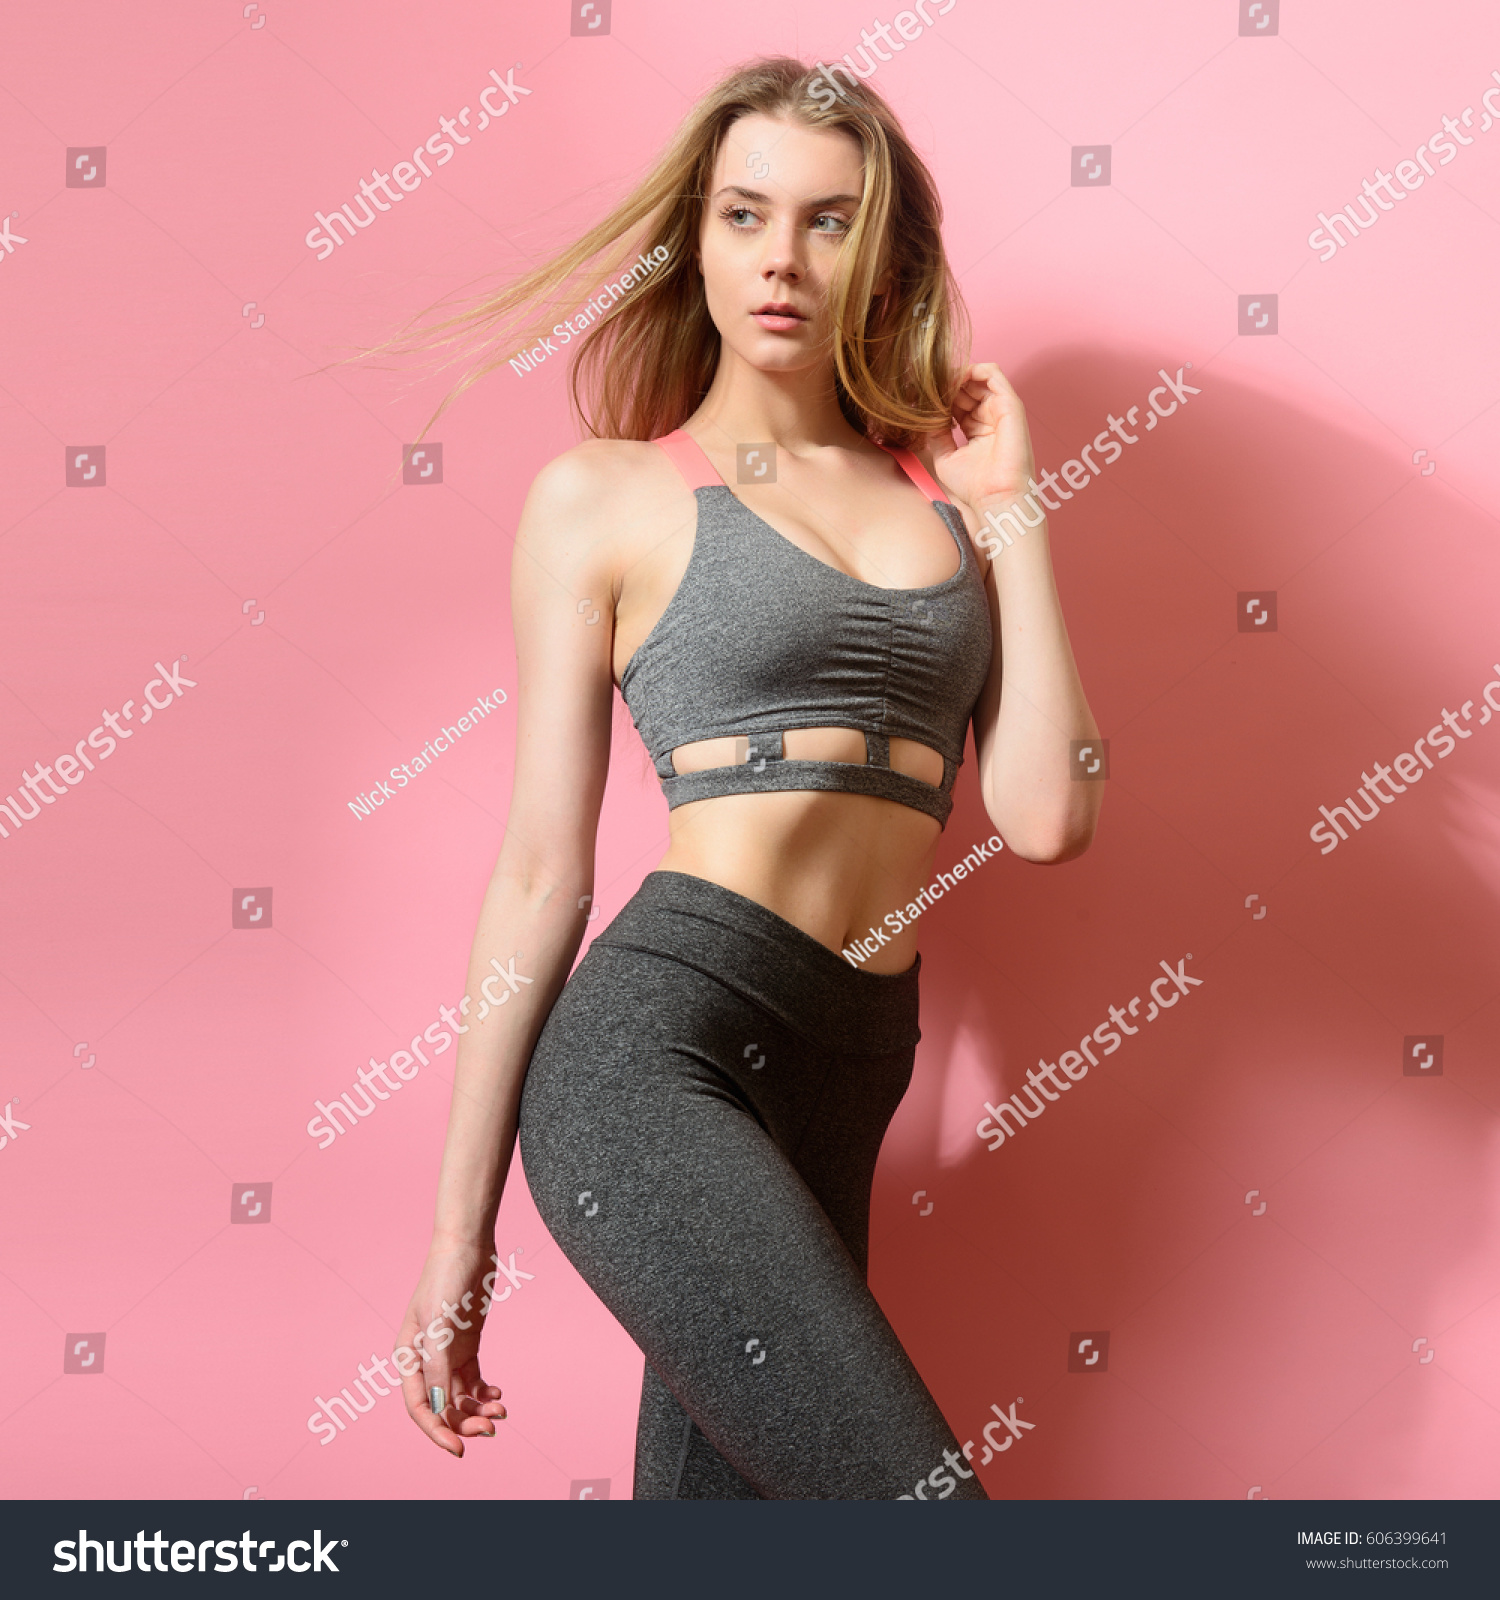 Beautiful Fitness Model Girl Posing Wearing Stock Photo (Safe to Use ...